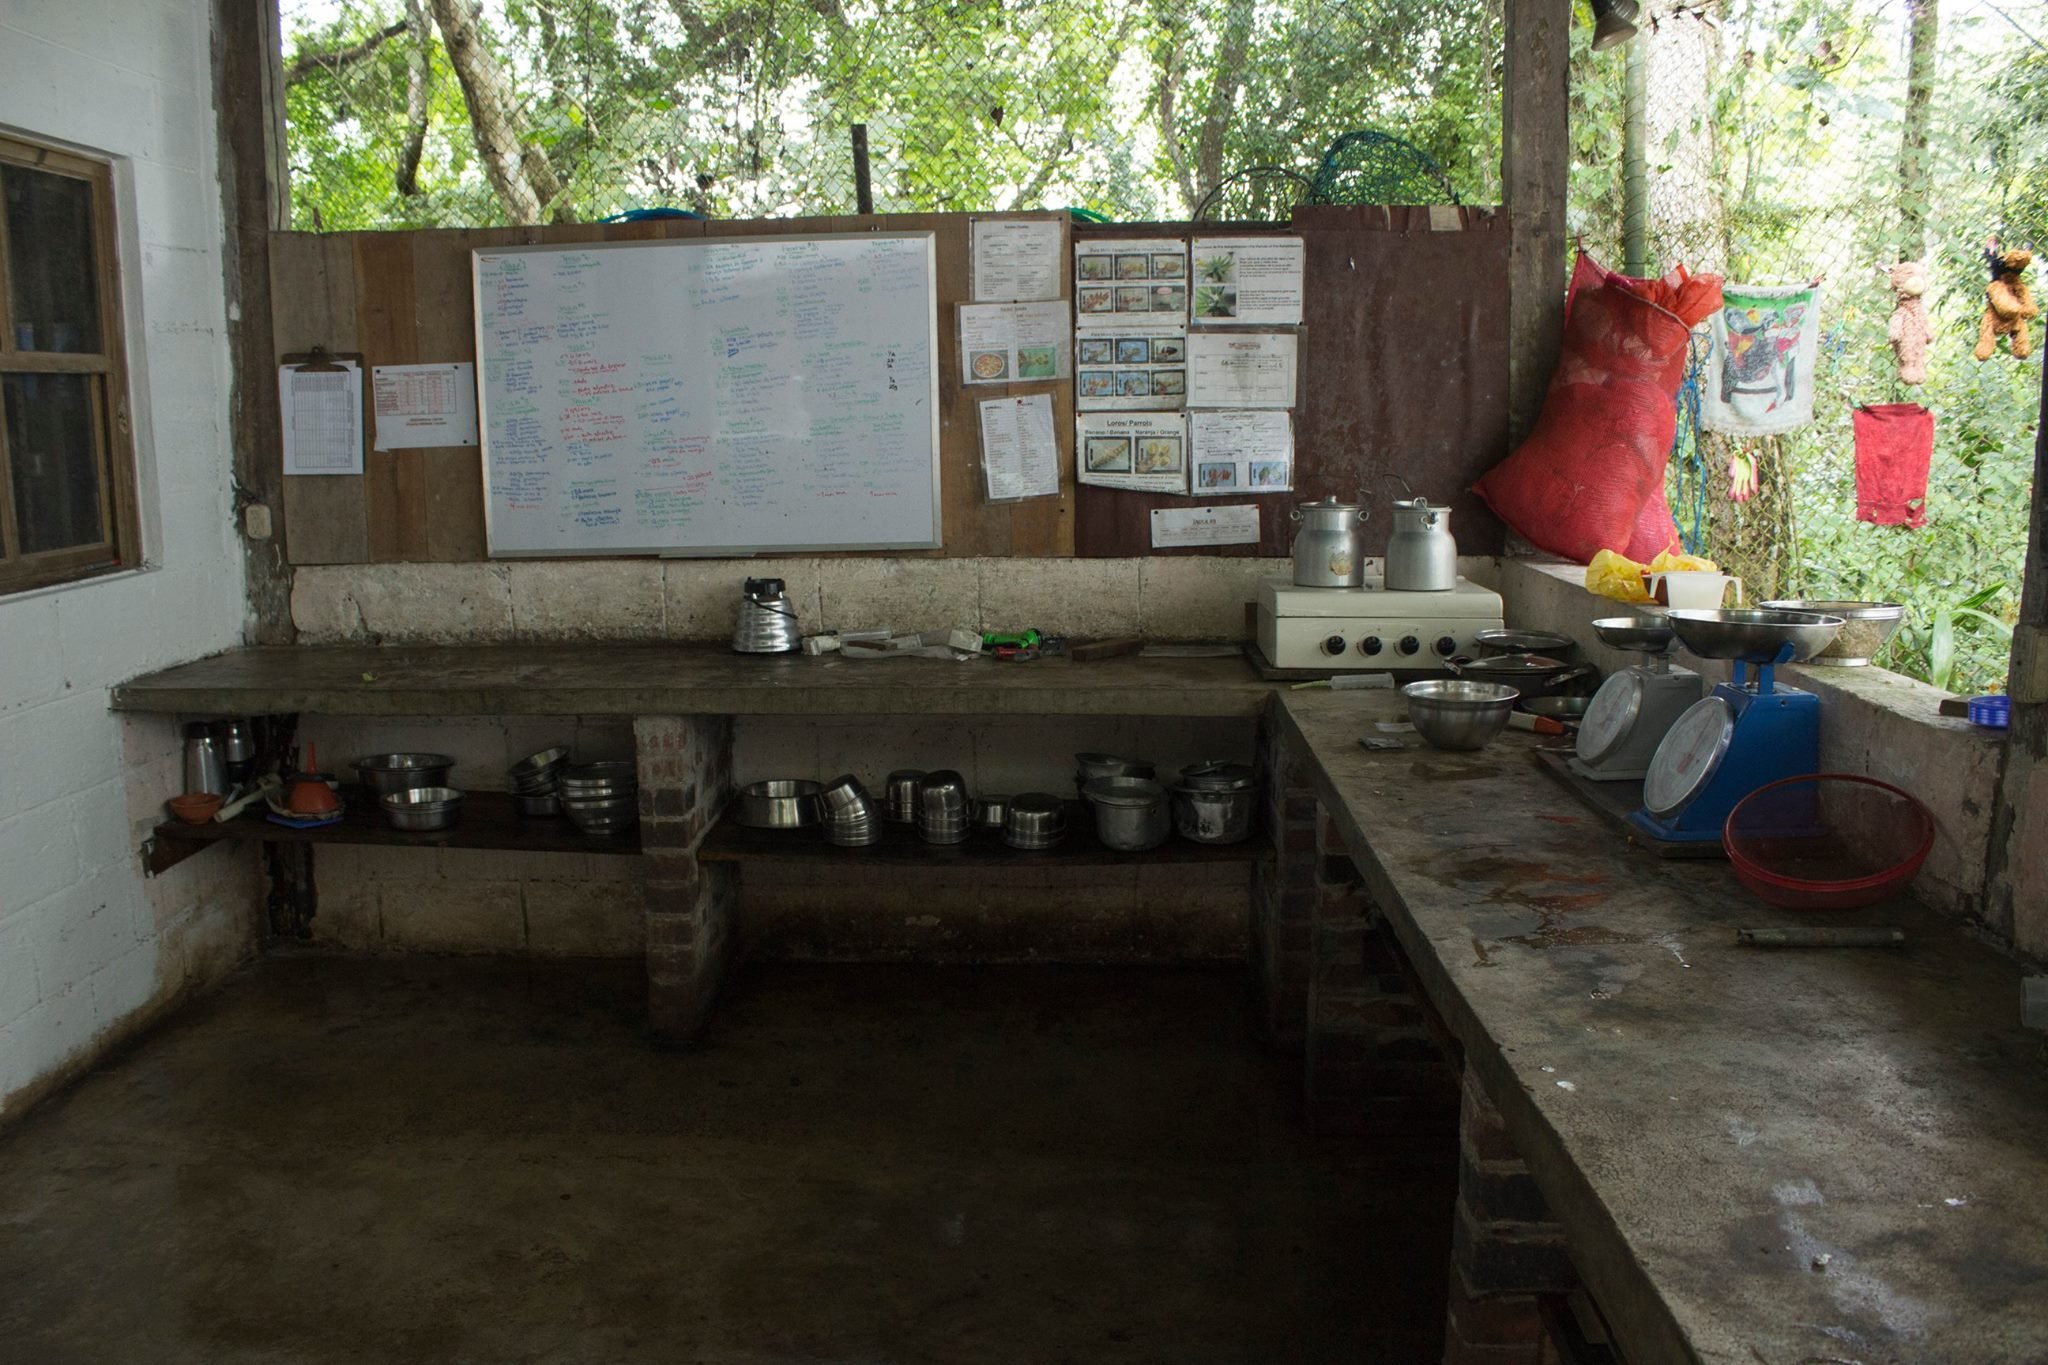  Food prep area where volunteers prepared meals for all the center’s animals every day. 